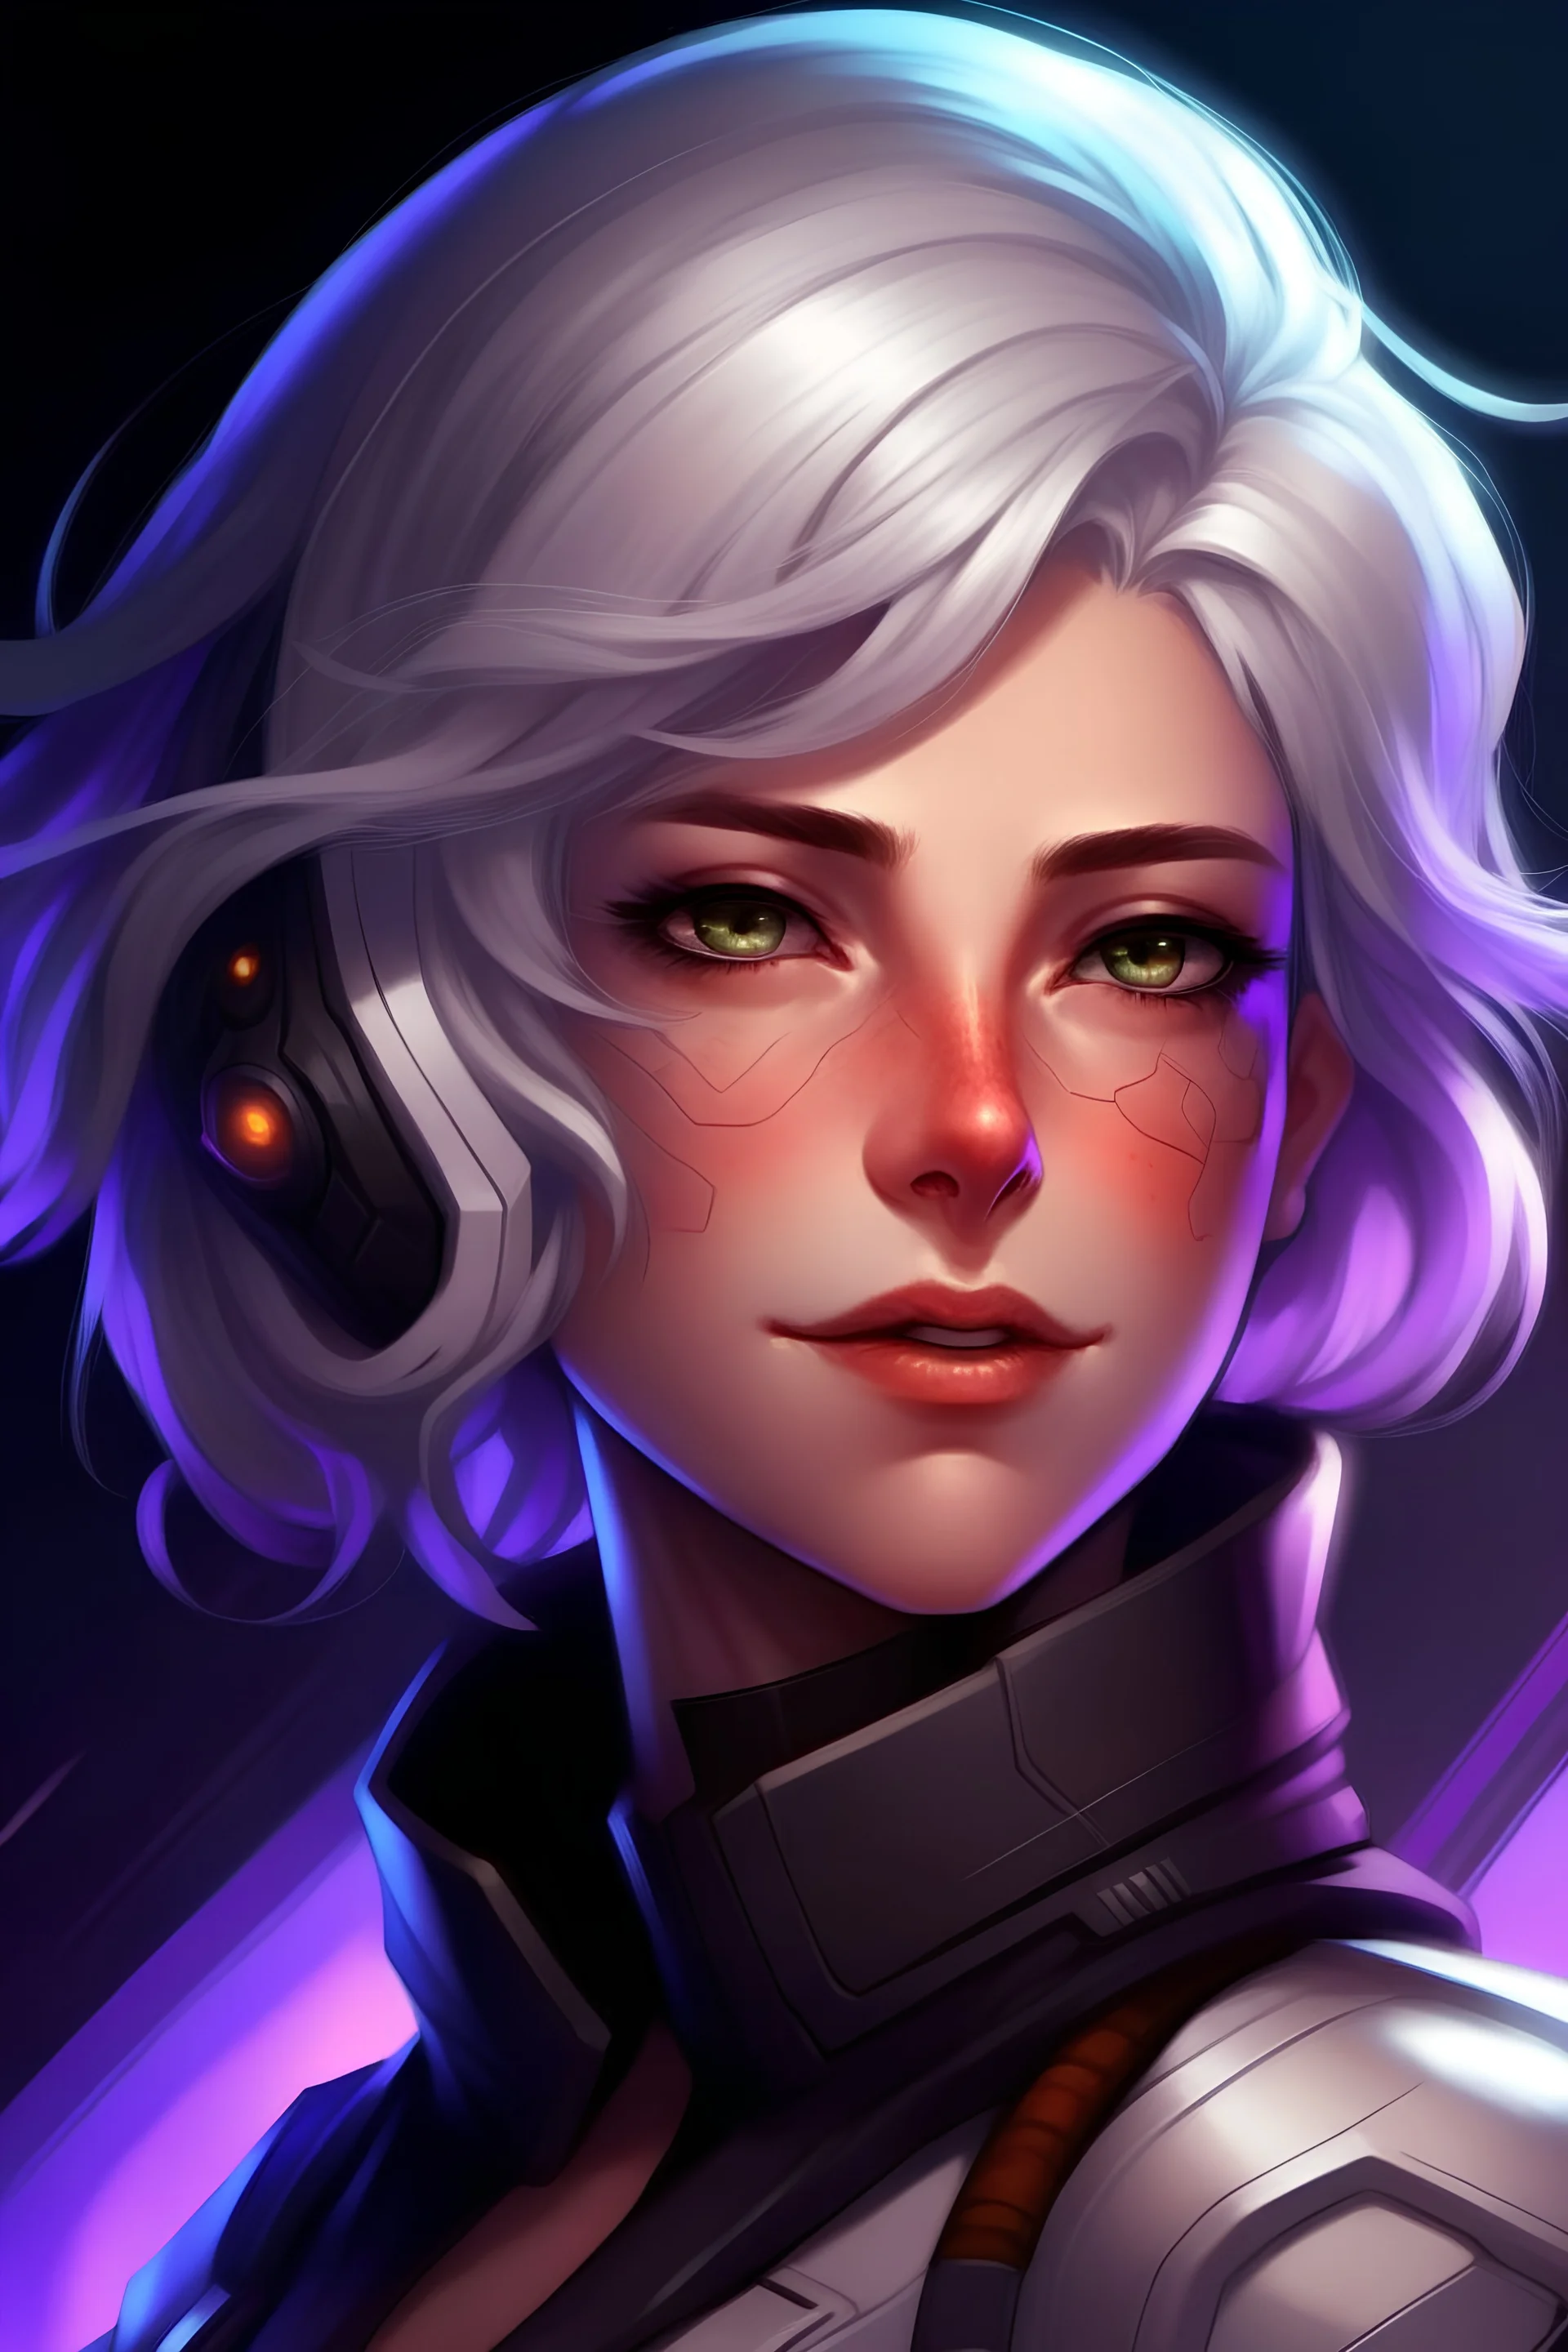 Galactic beautiful aged woman commander Ship deep violet eyed whitehaired